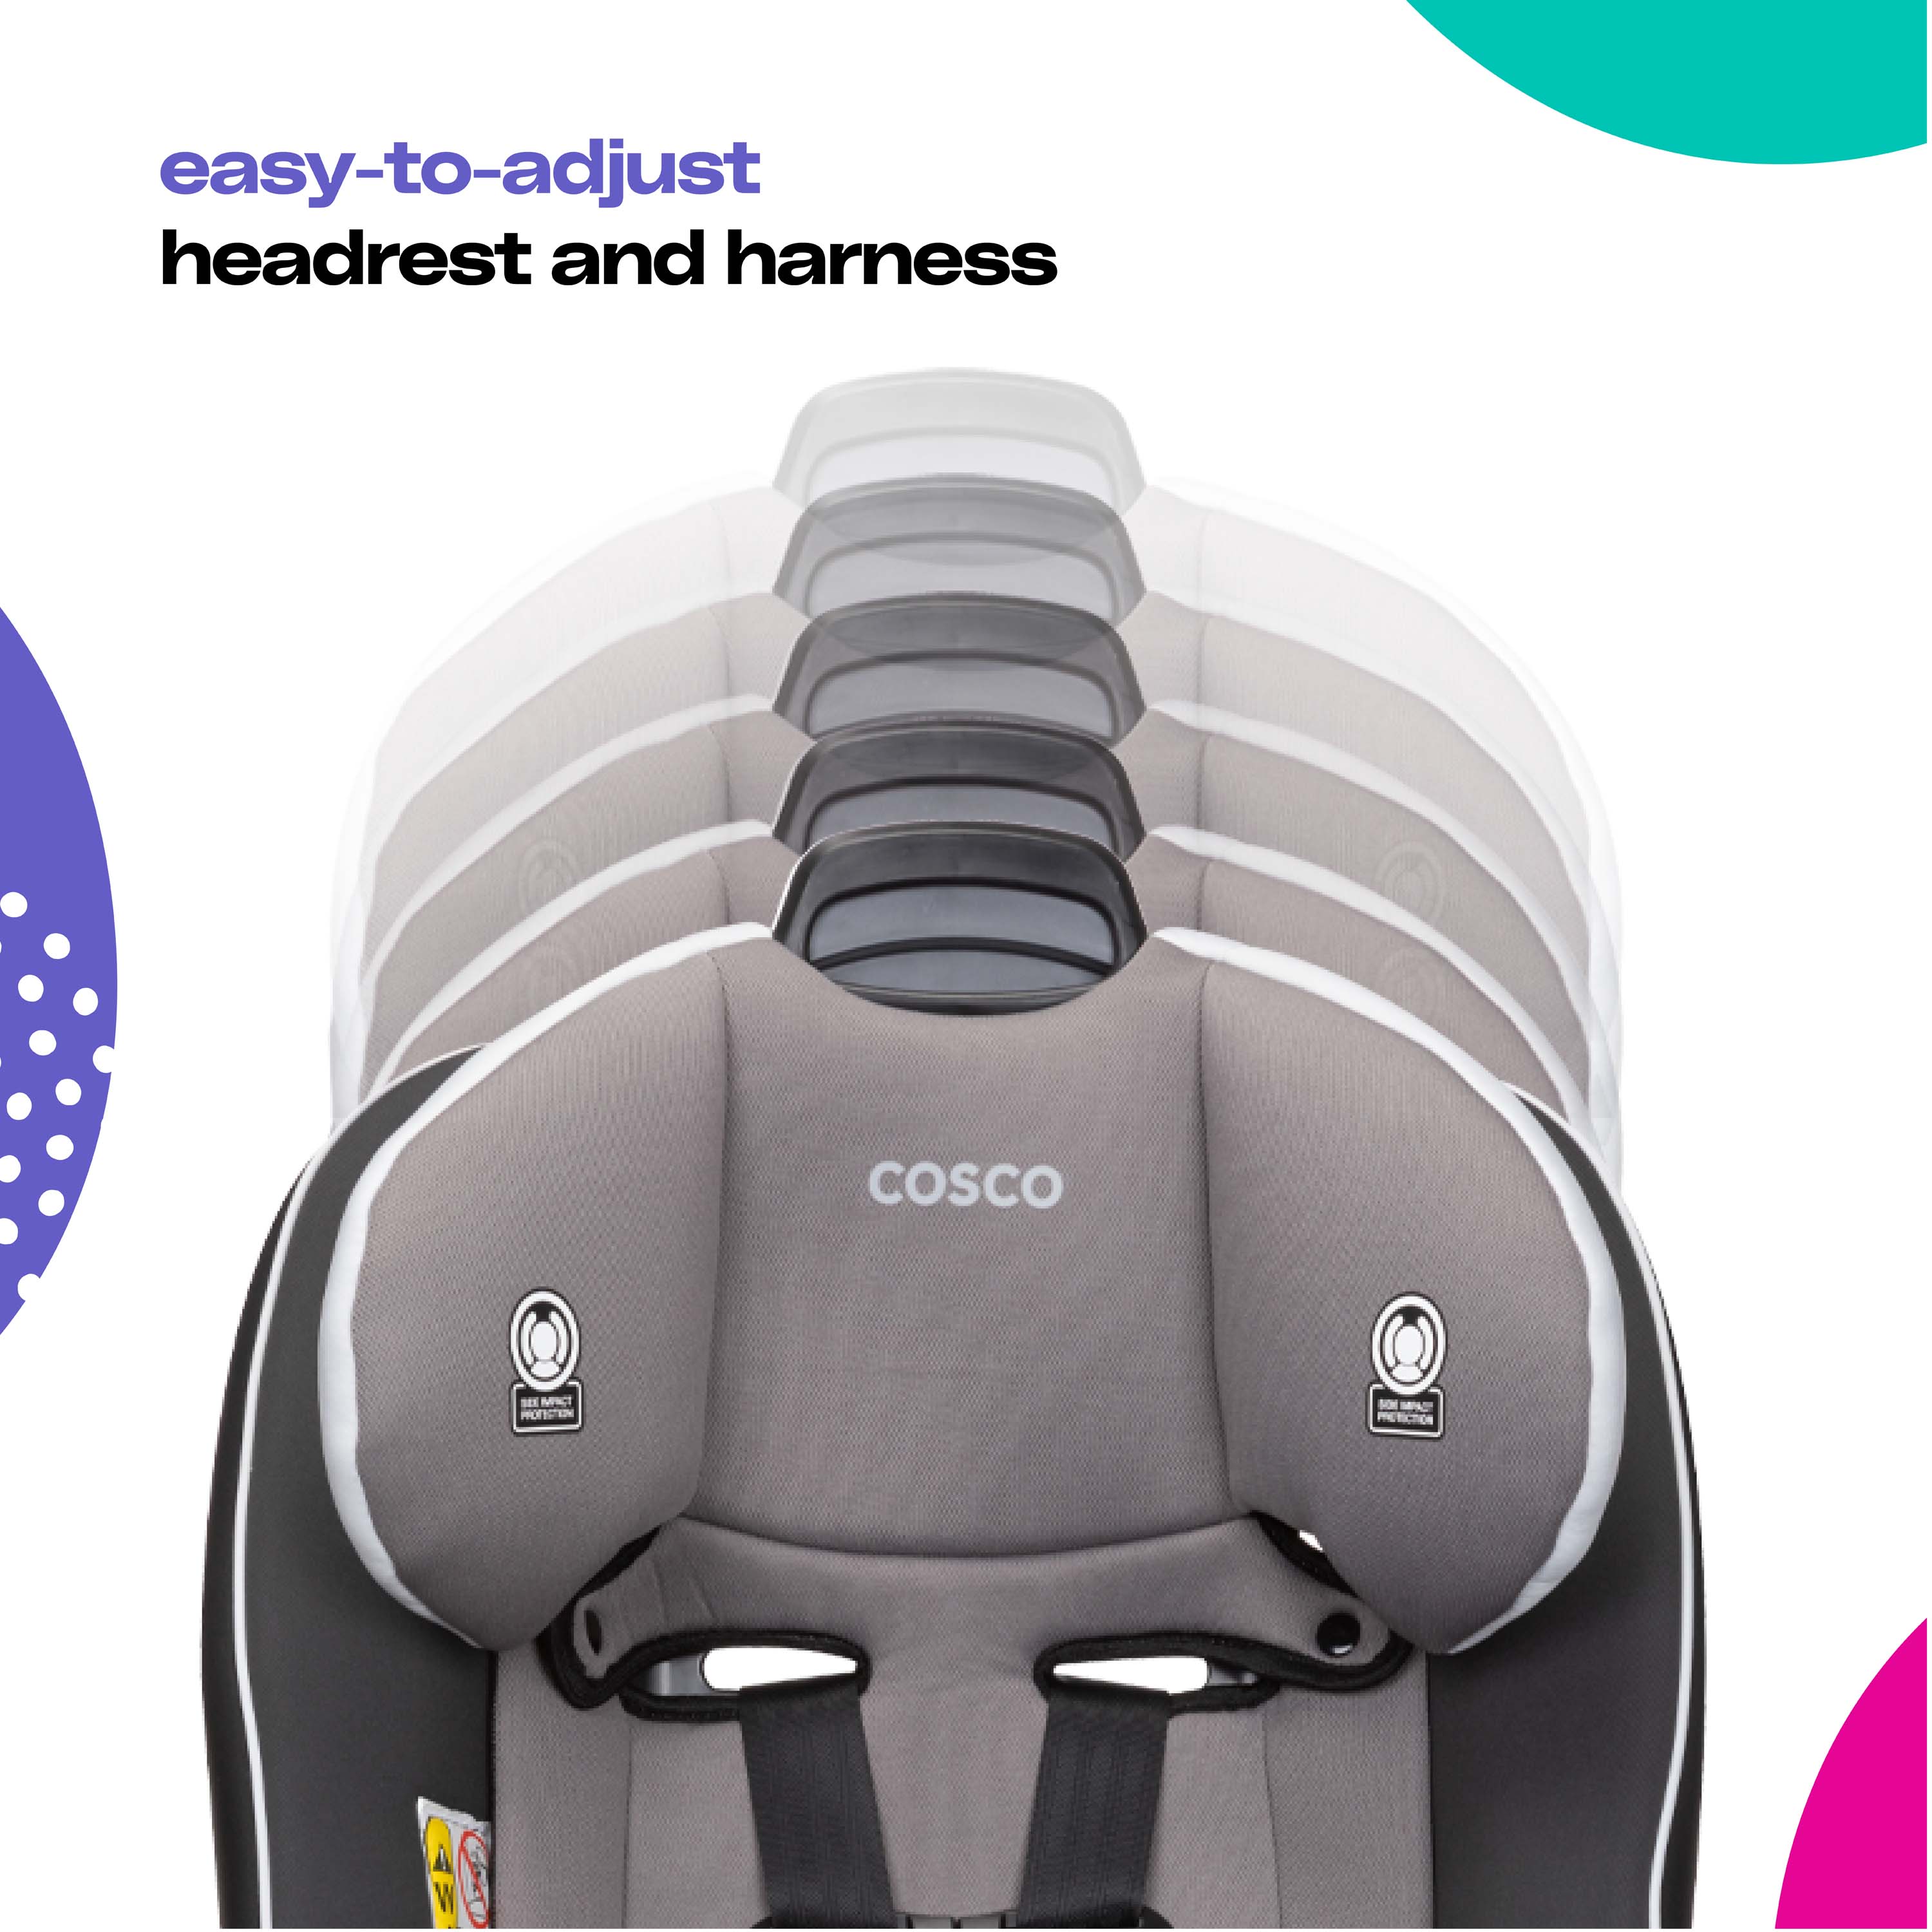 Cosco Kids Easy Elite All-in-One Convertible Car Seat, Sleet - image 5 of 27